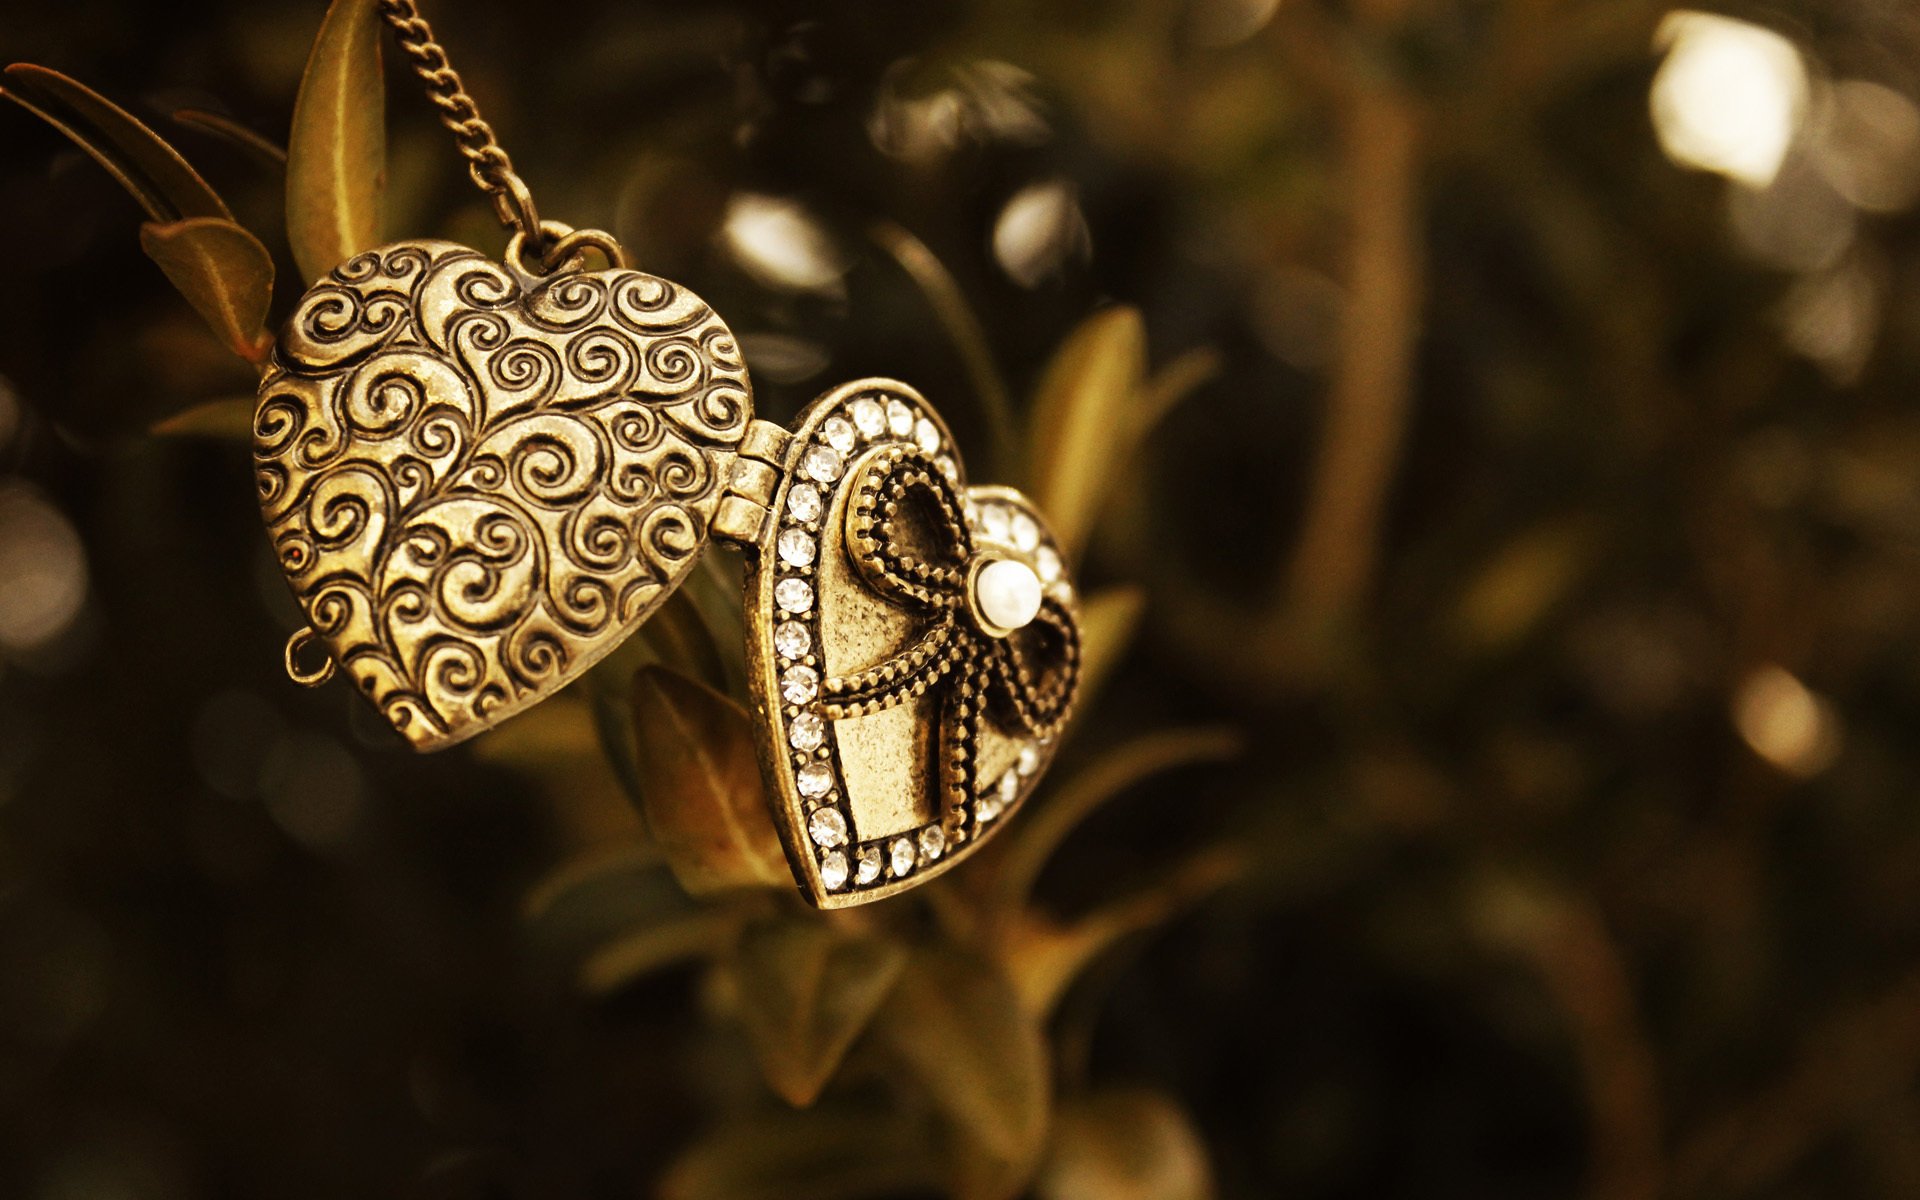 Heart-shaped pendant made of gold